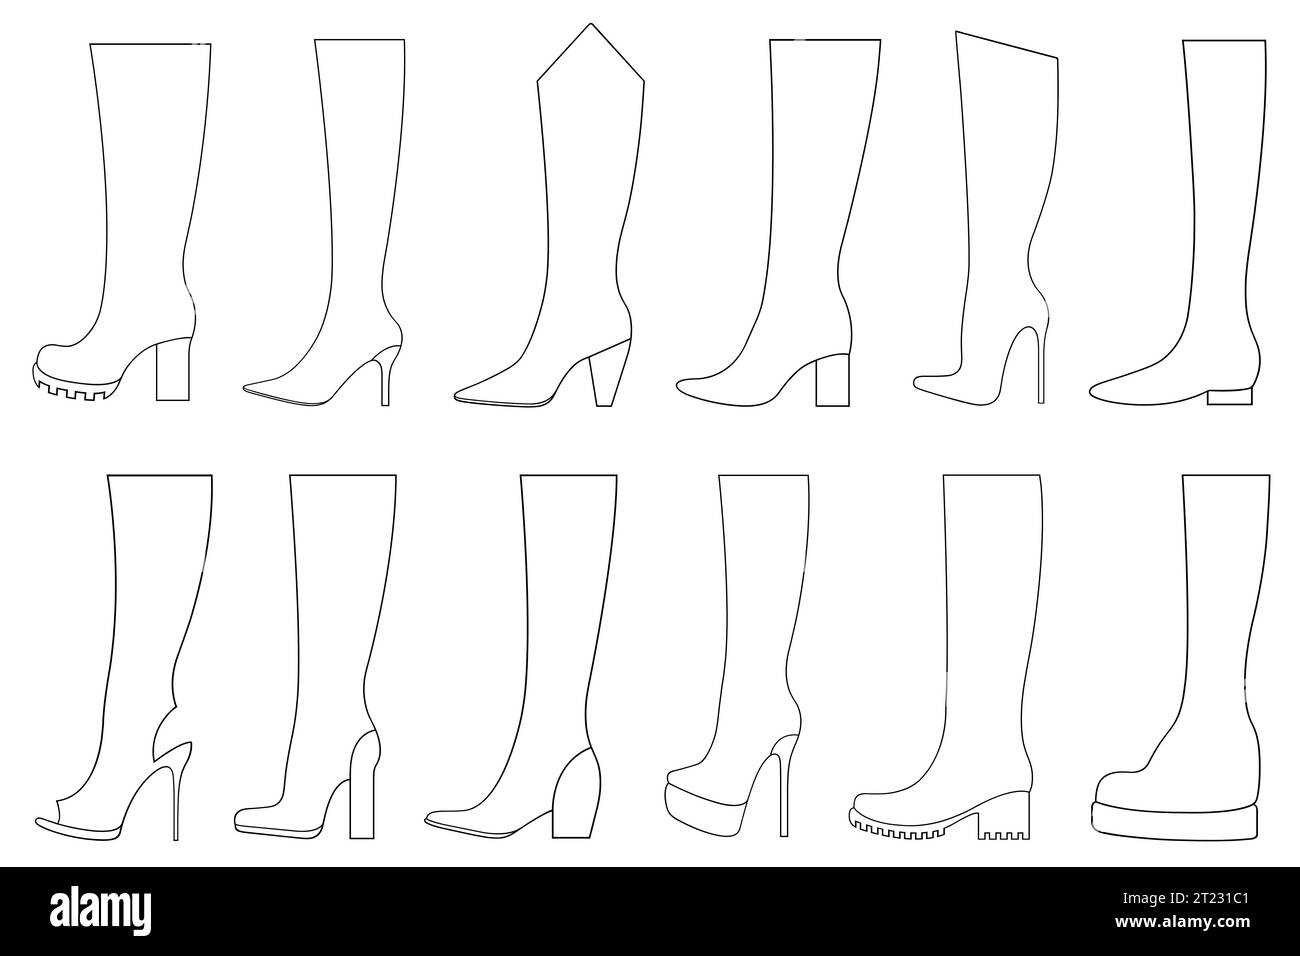 Illustration of different boots isolated on white Stock Photo